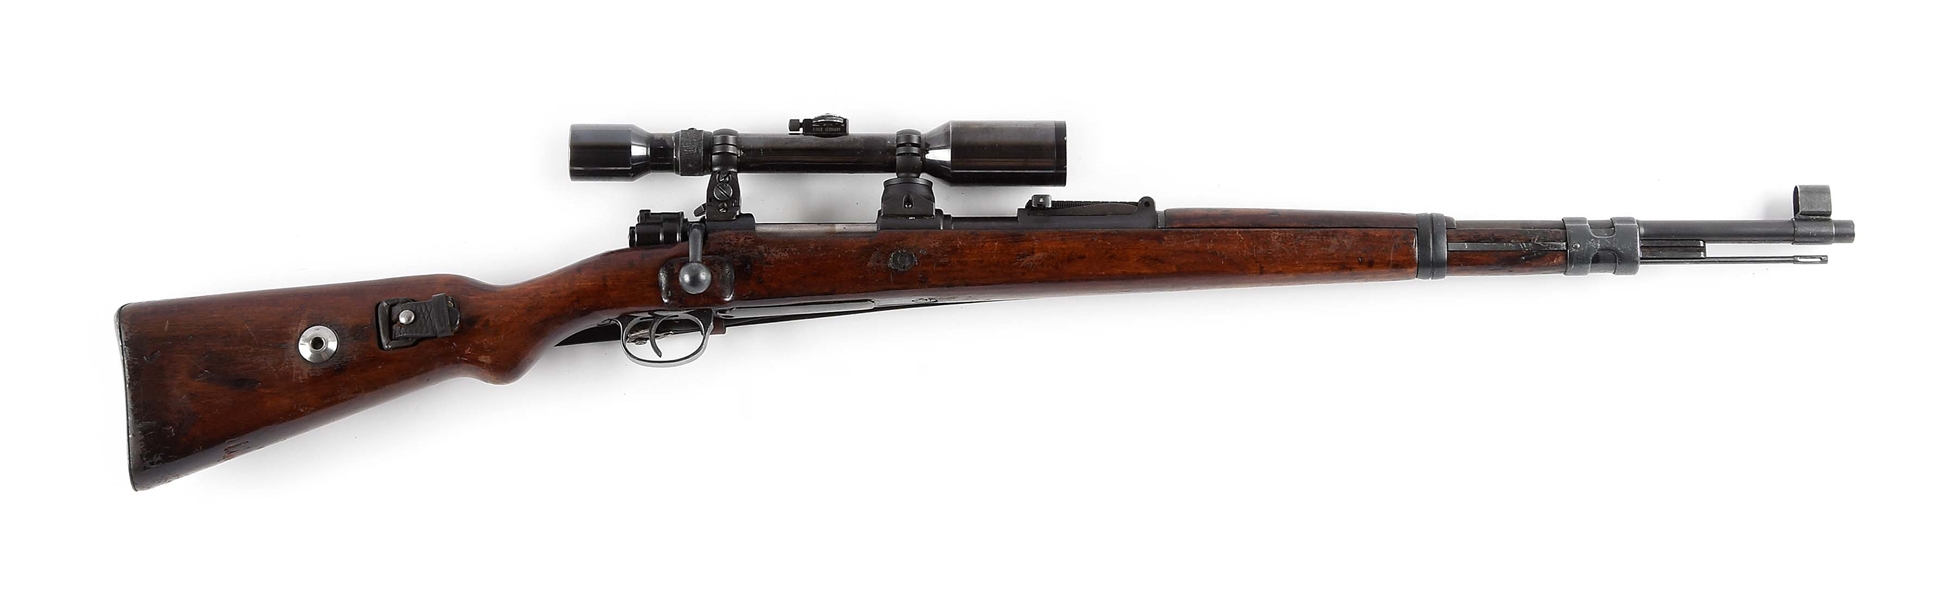 (C) MAUSER SNIPER BOLT ACTION RIFLE WITH SCOPE.